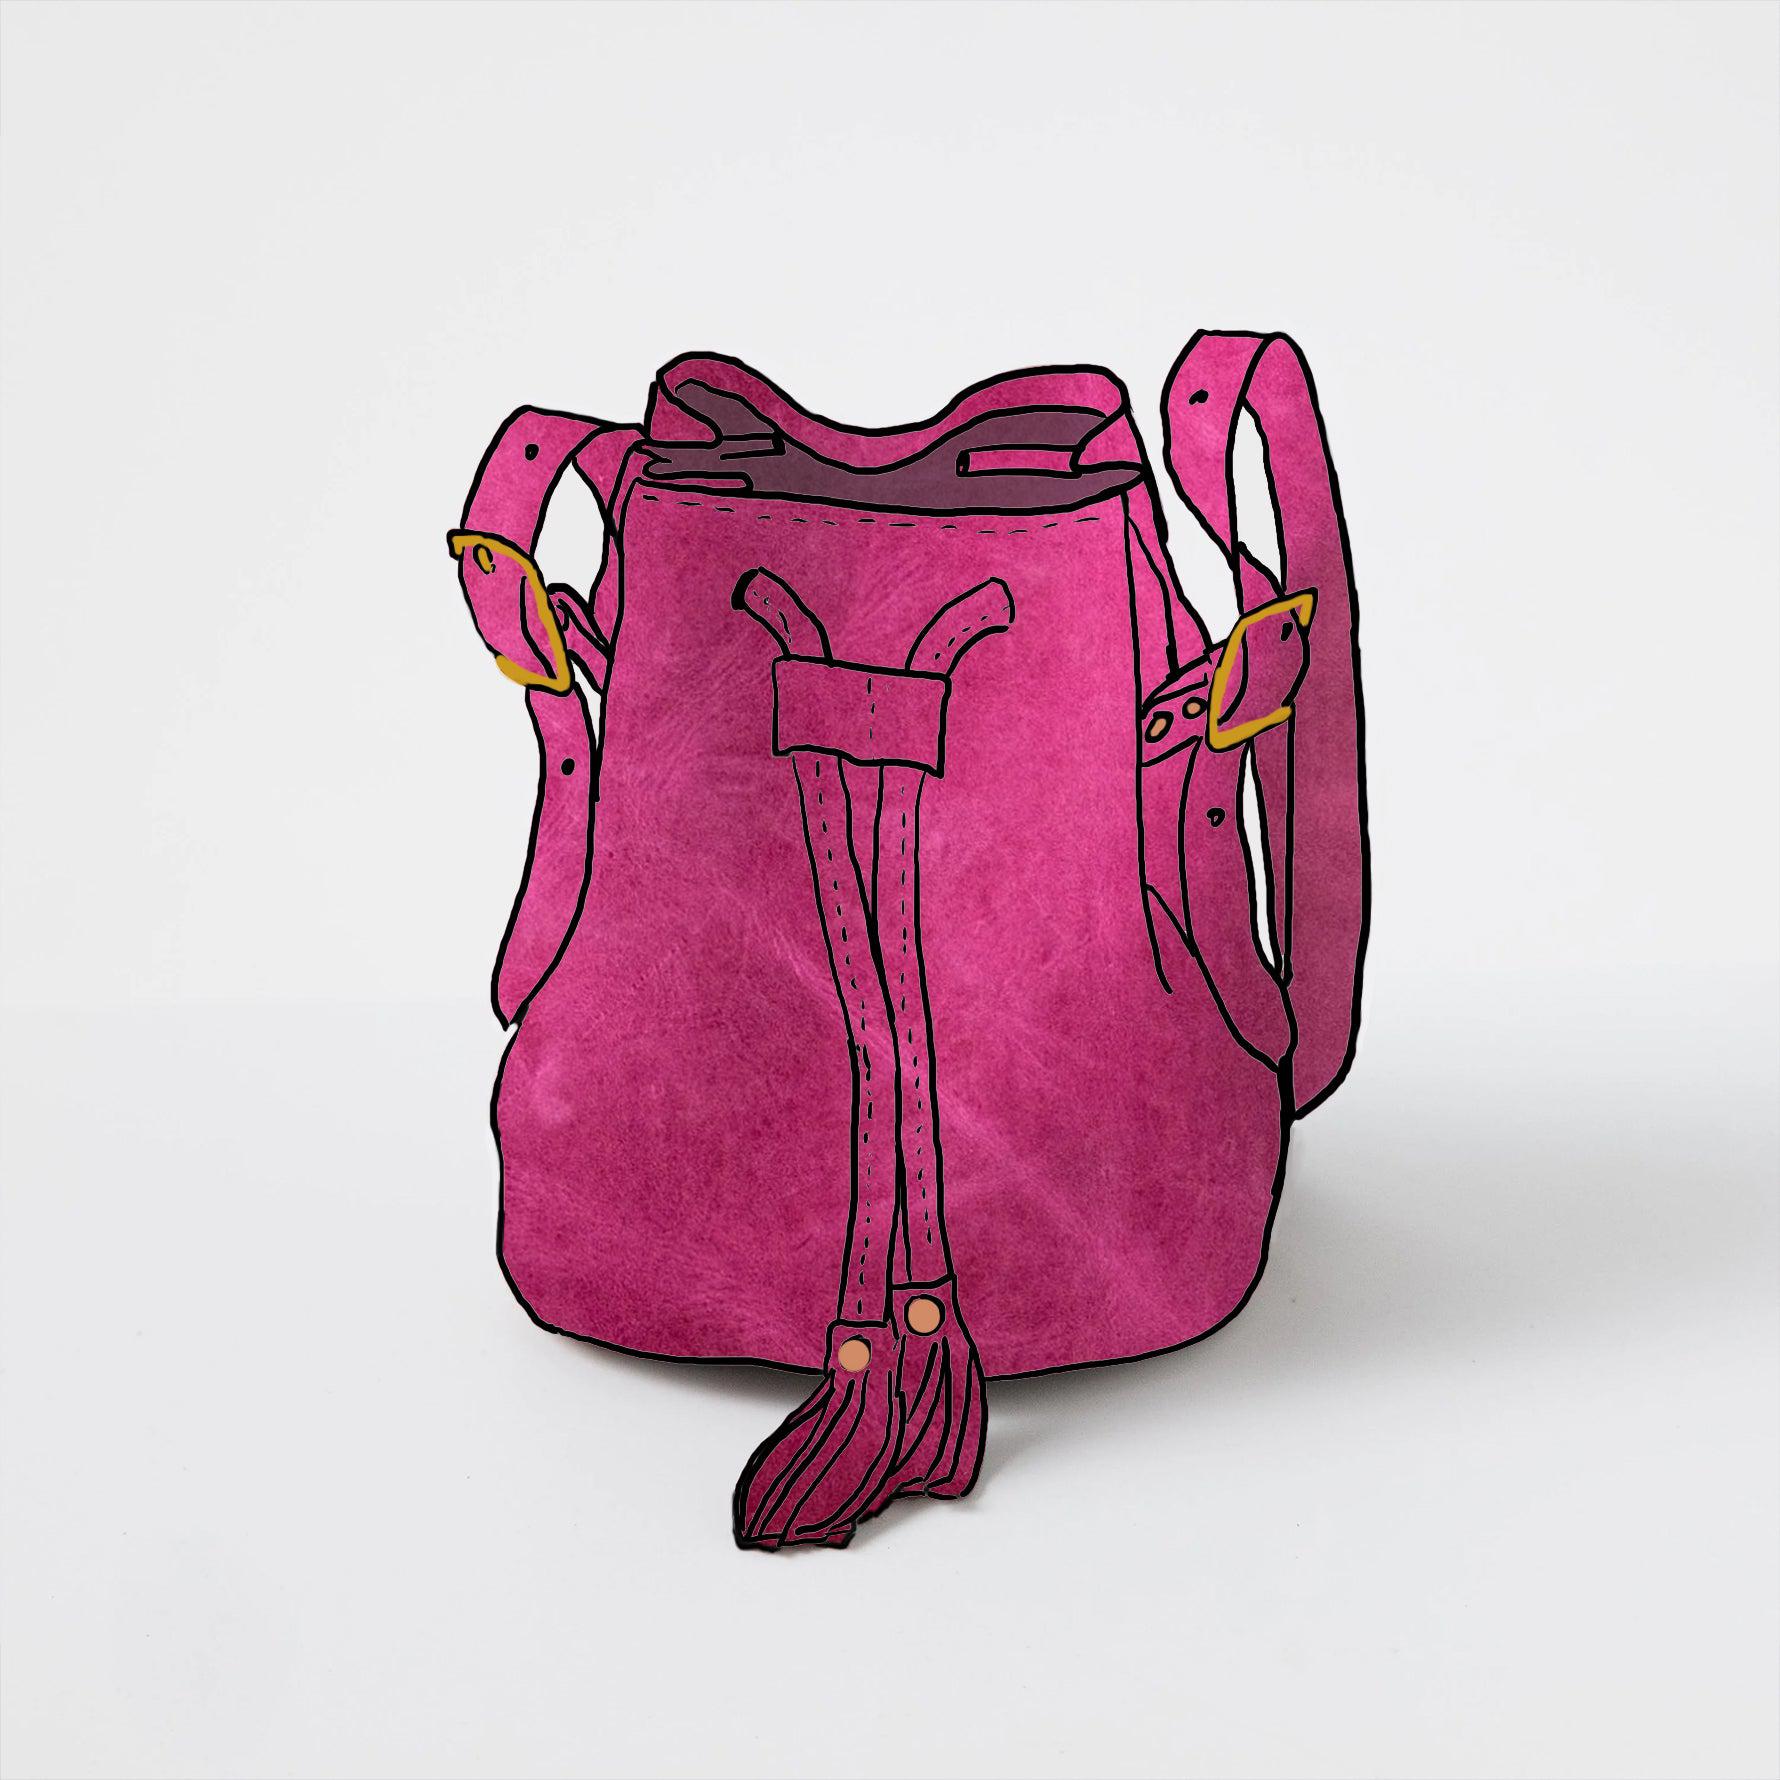 Scratch-and-Dent Pink Bucket Bag